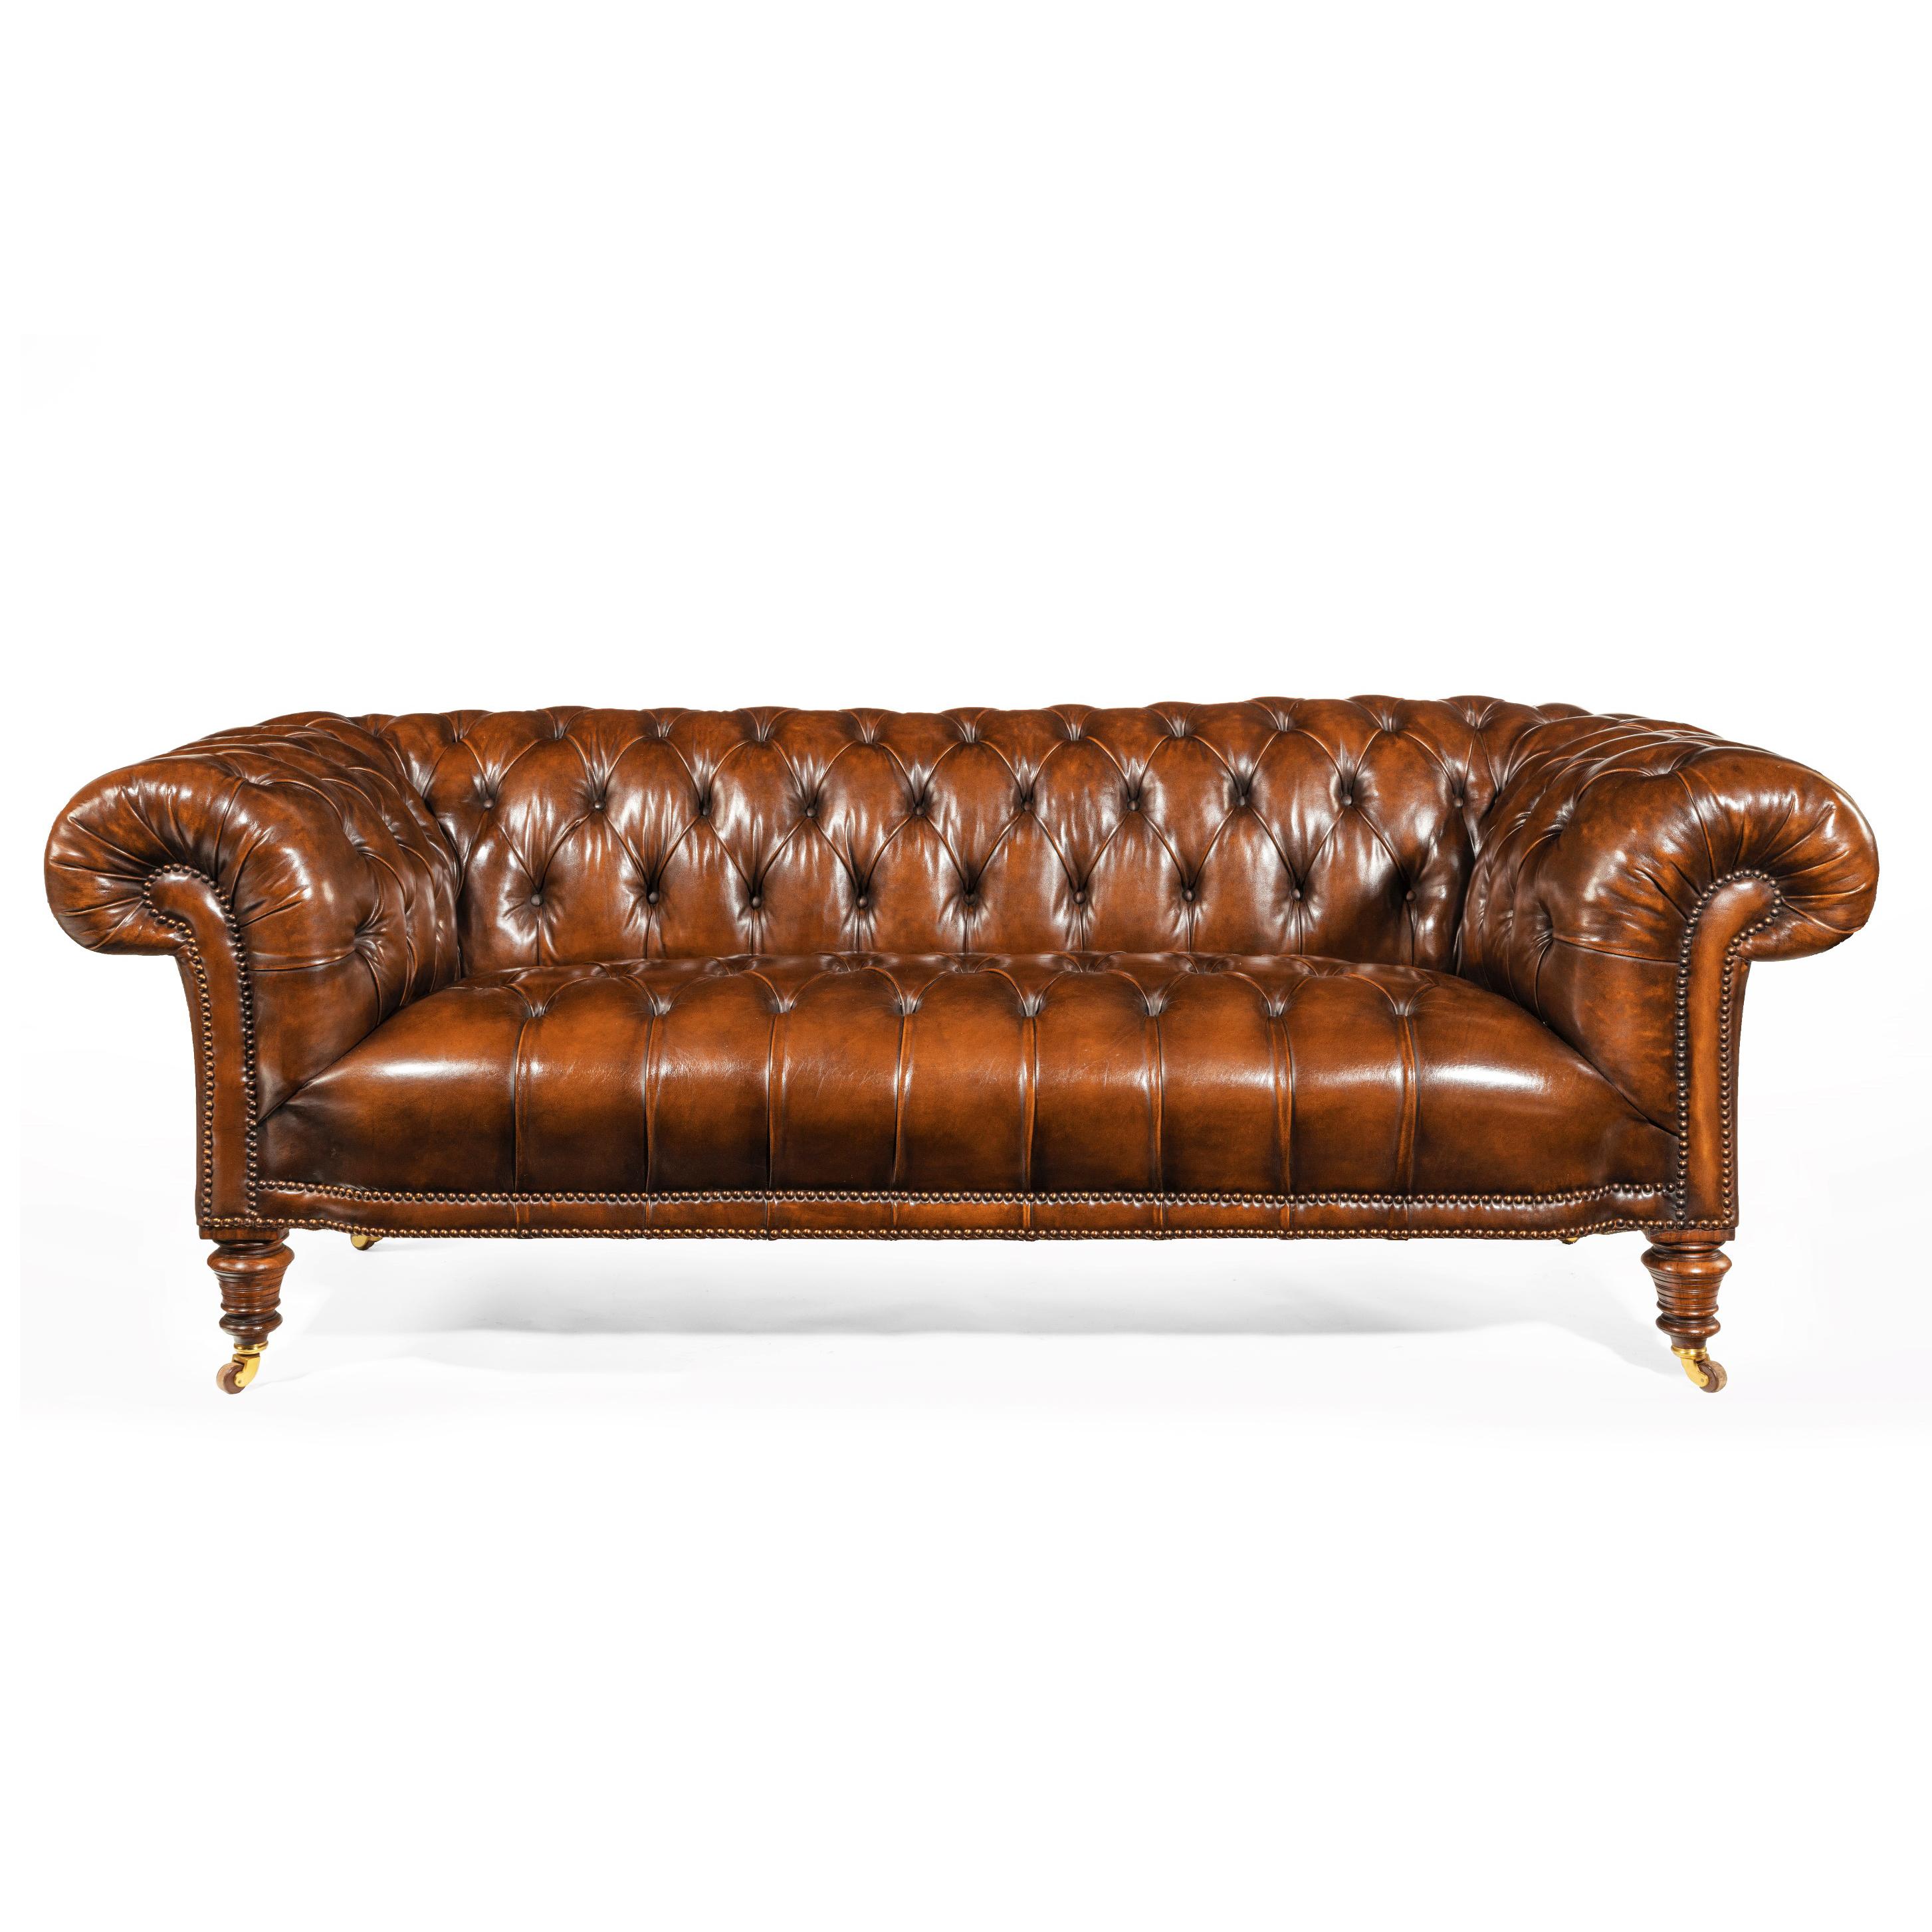 19th Century Gillows Figured Walnut Leather Chesterfield Sofa 1